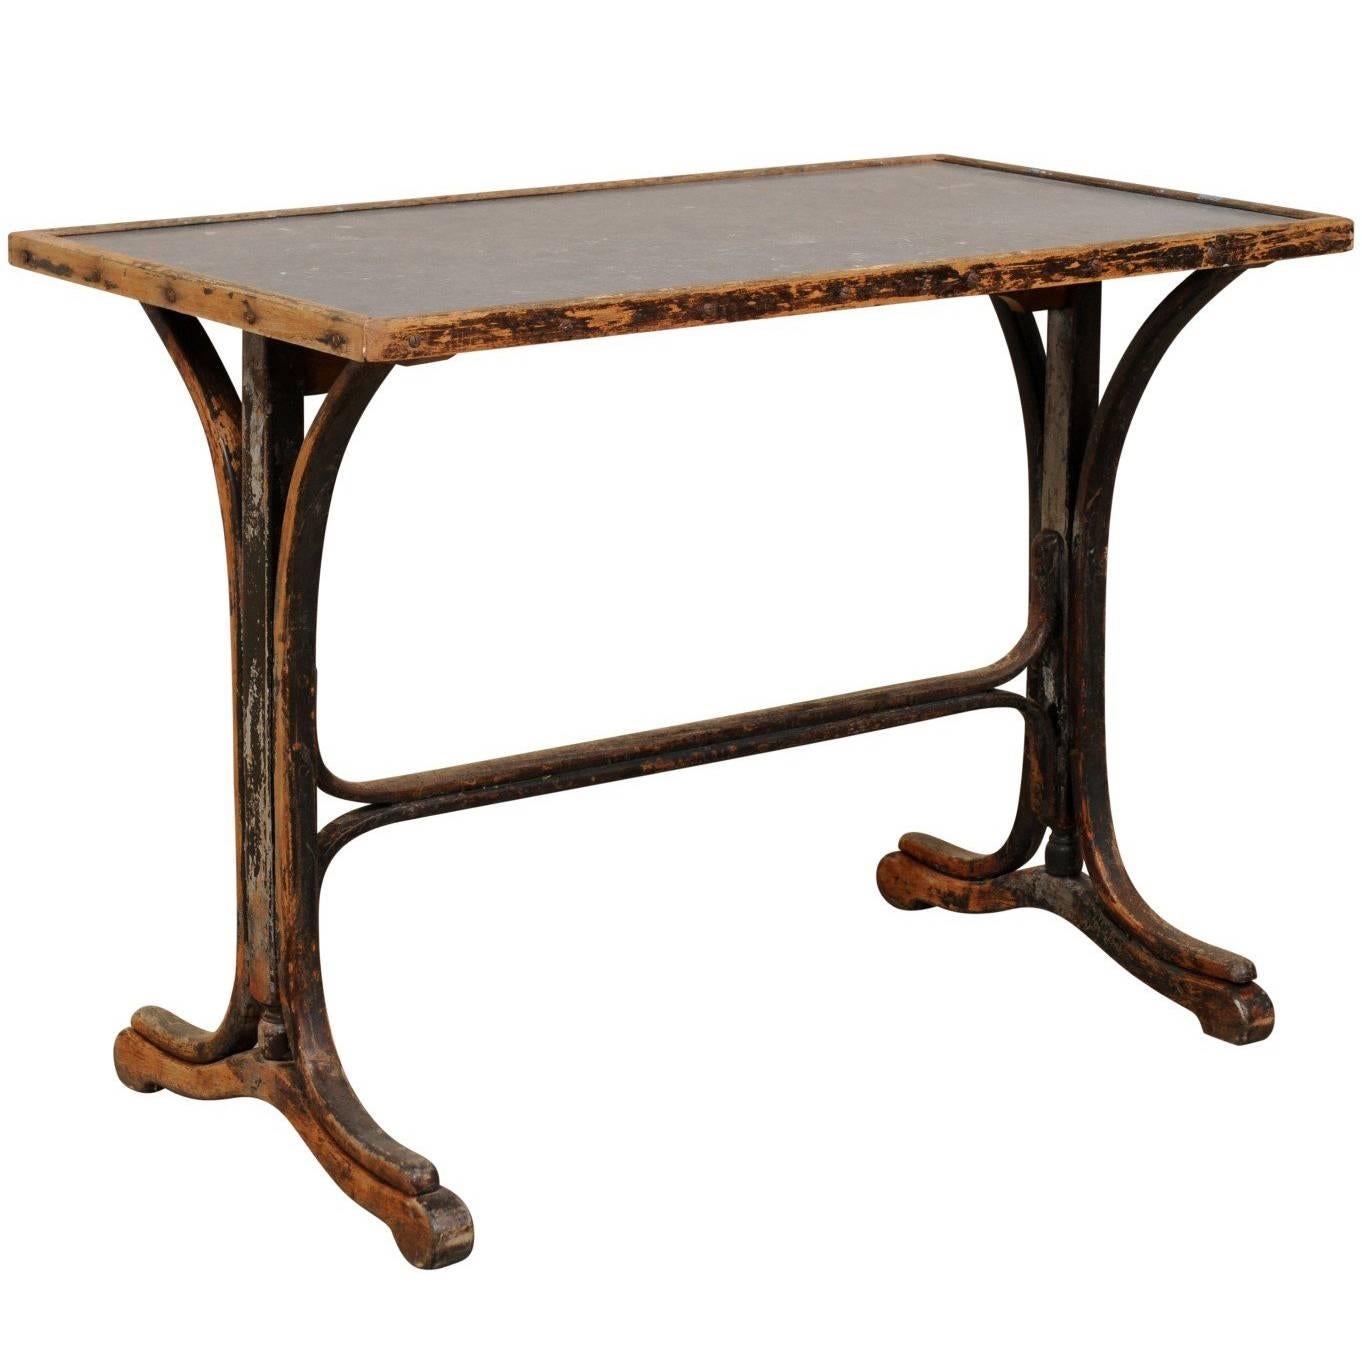 19th Century French Stone Top Desk with Beautifully Patinated Trestle Wood Base